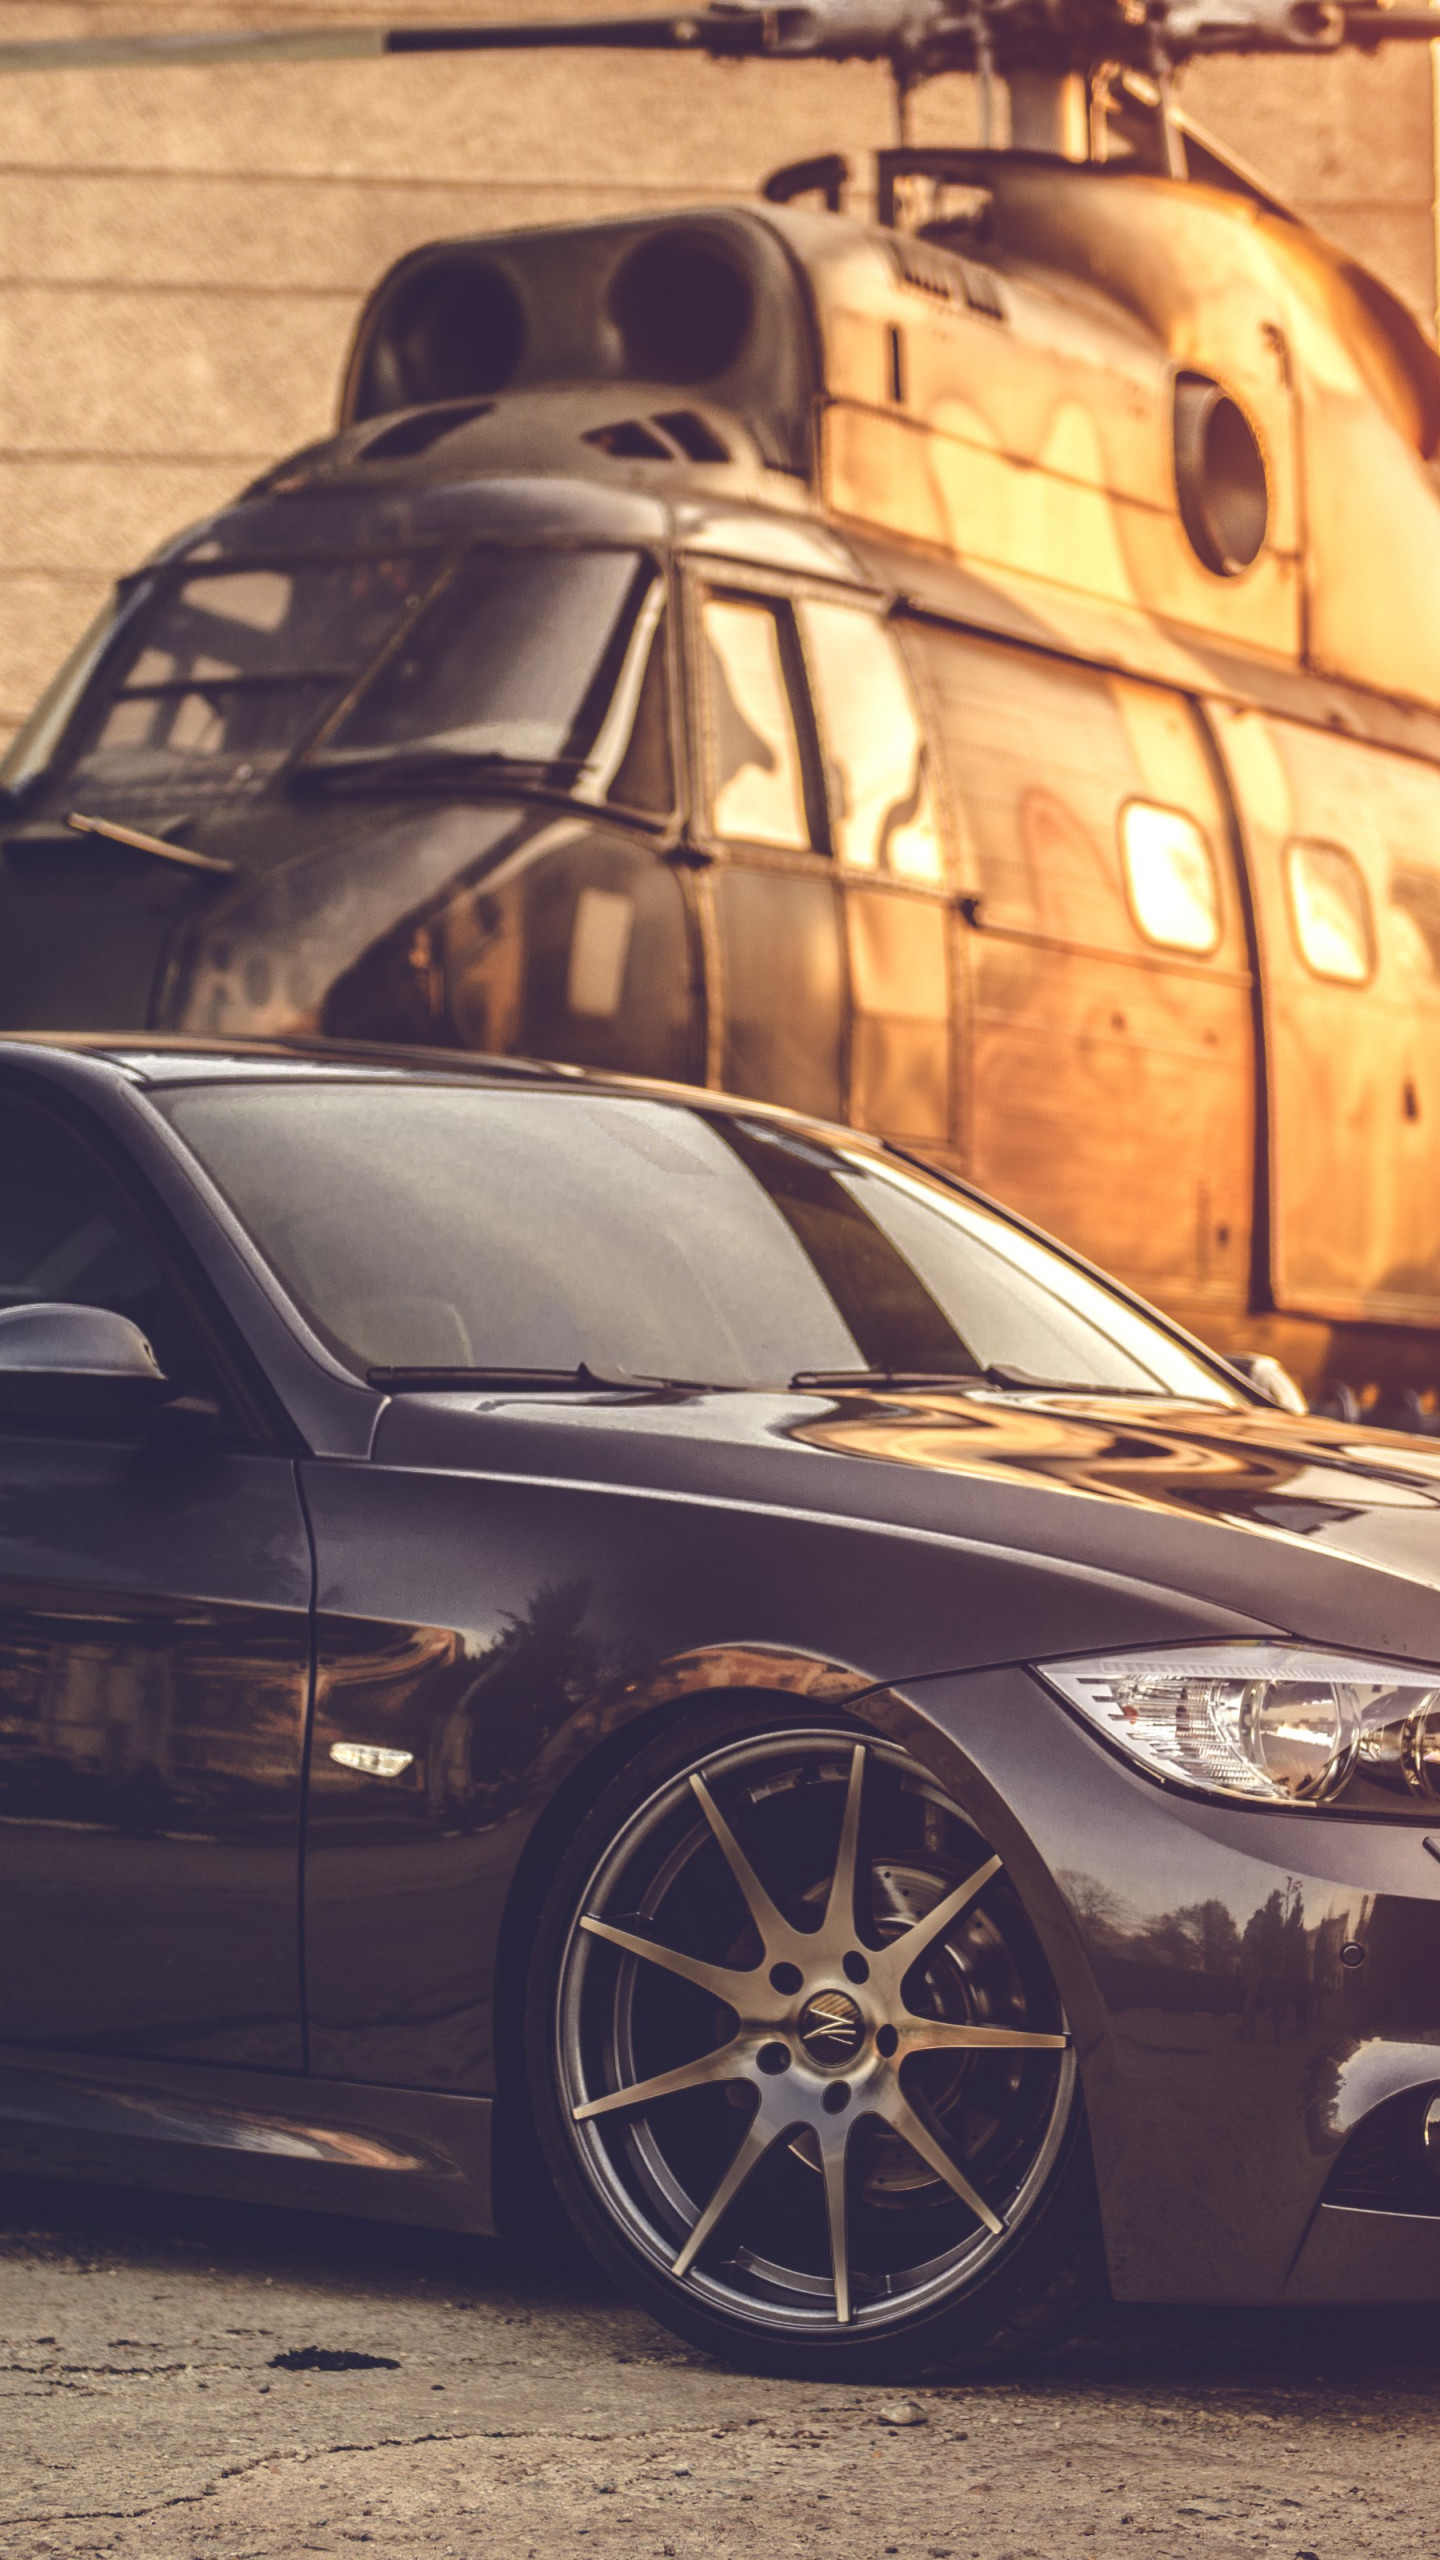 BMW E90 and one helicopter wallpaper 1440x2560